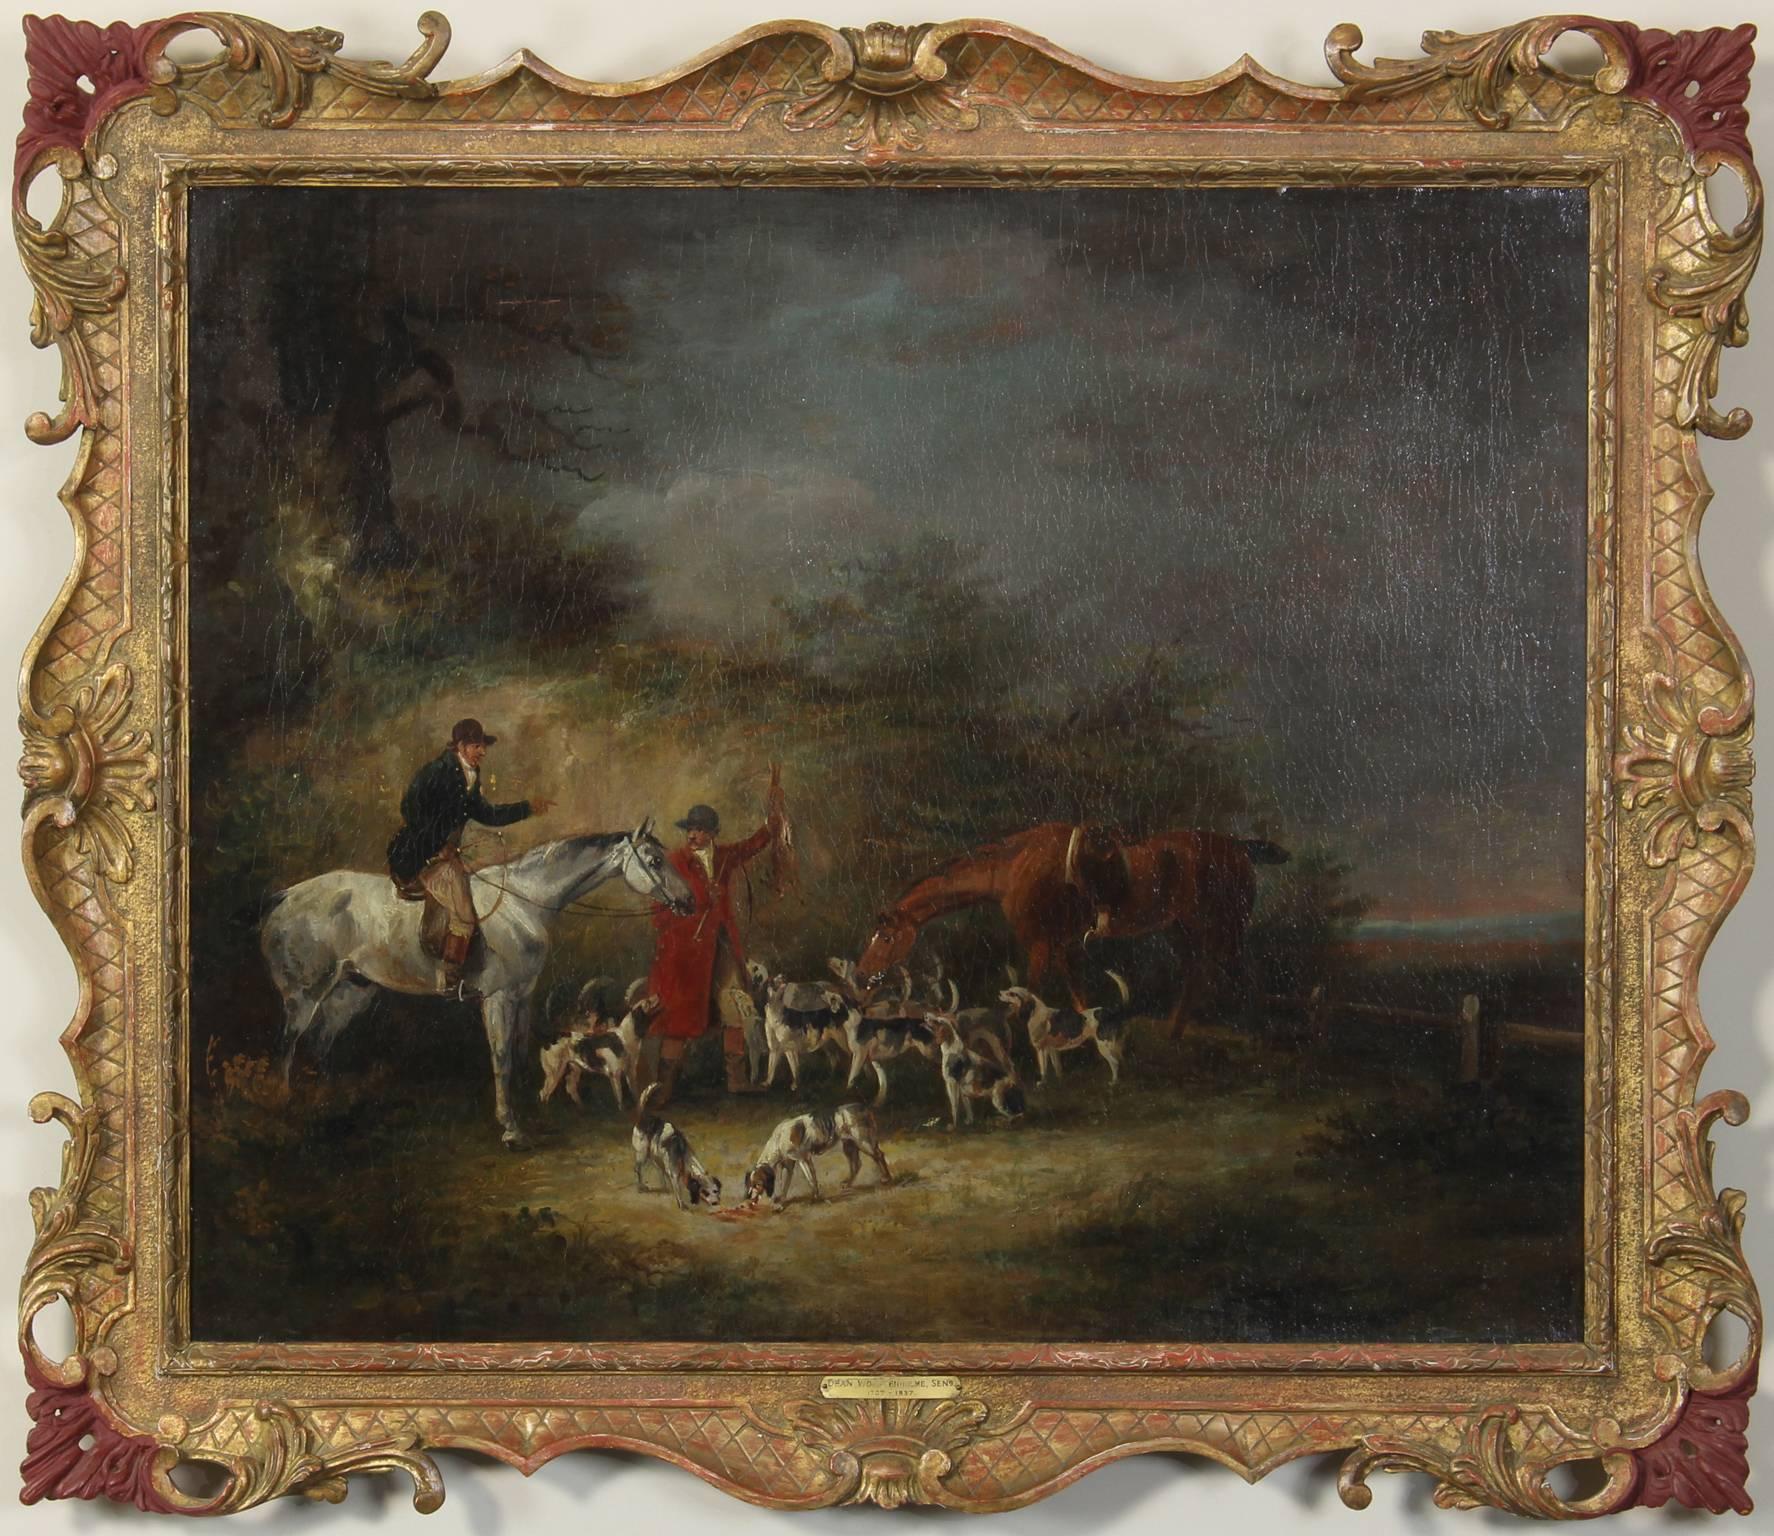 An early 19th century English oil on canvas painting by noted sporting artist Dean Wolstenholme Sr. (1757-1837) titled 